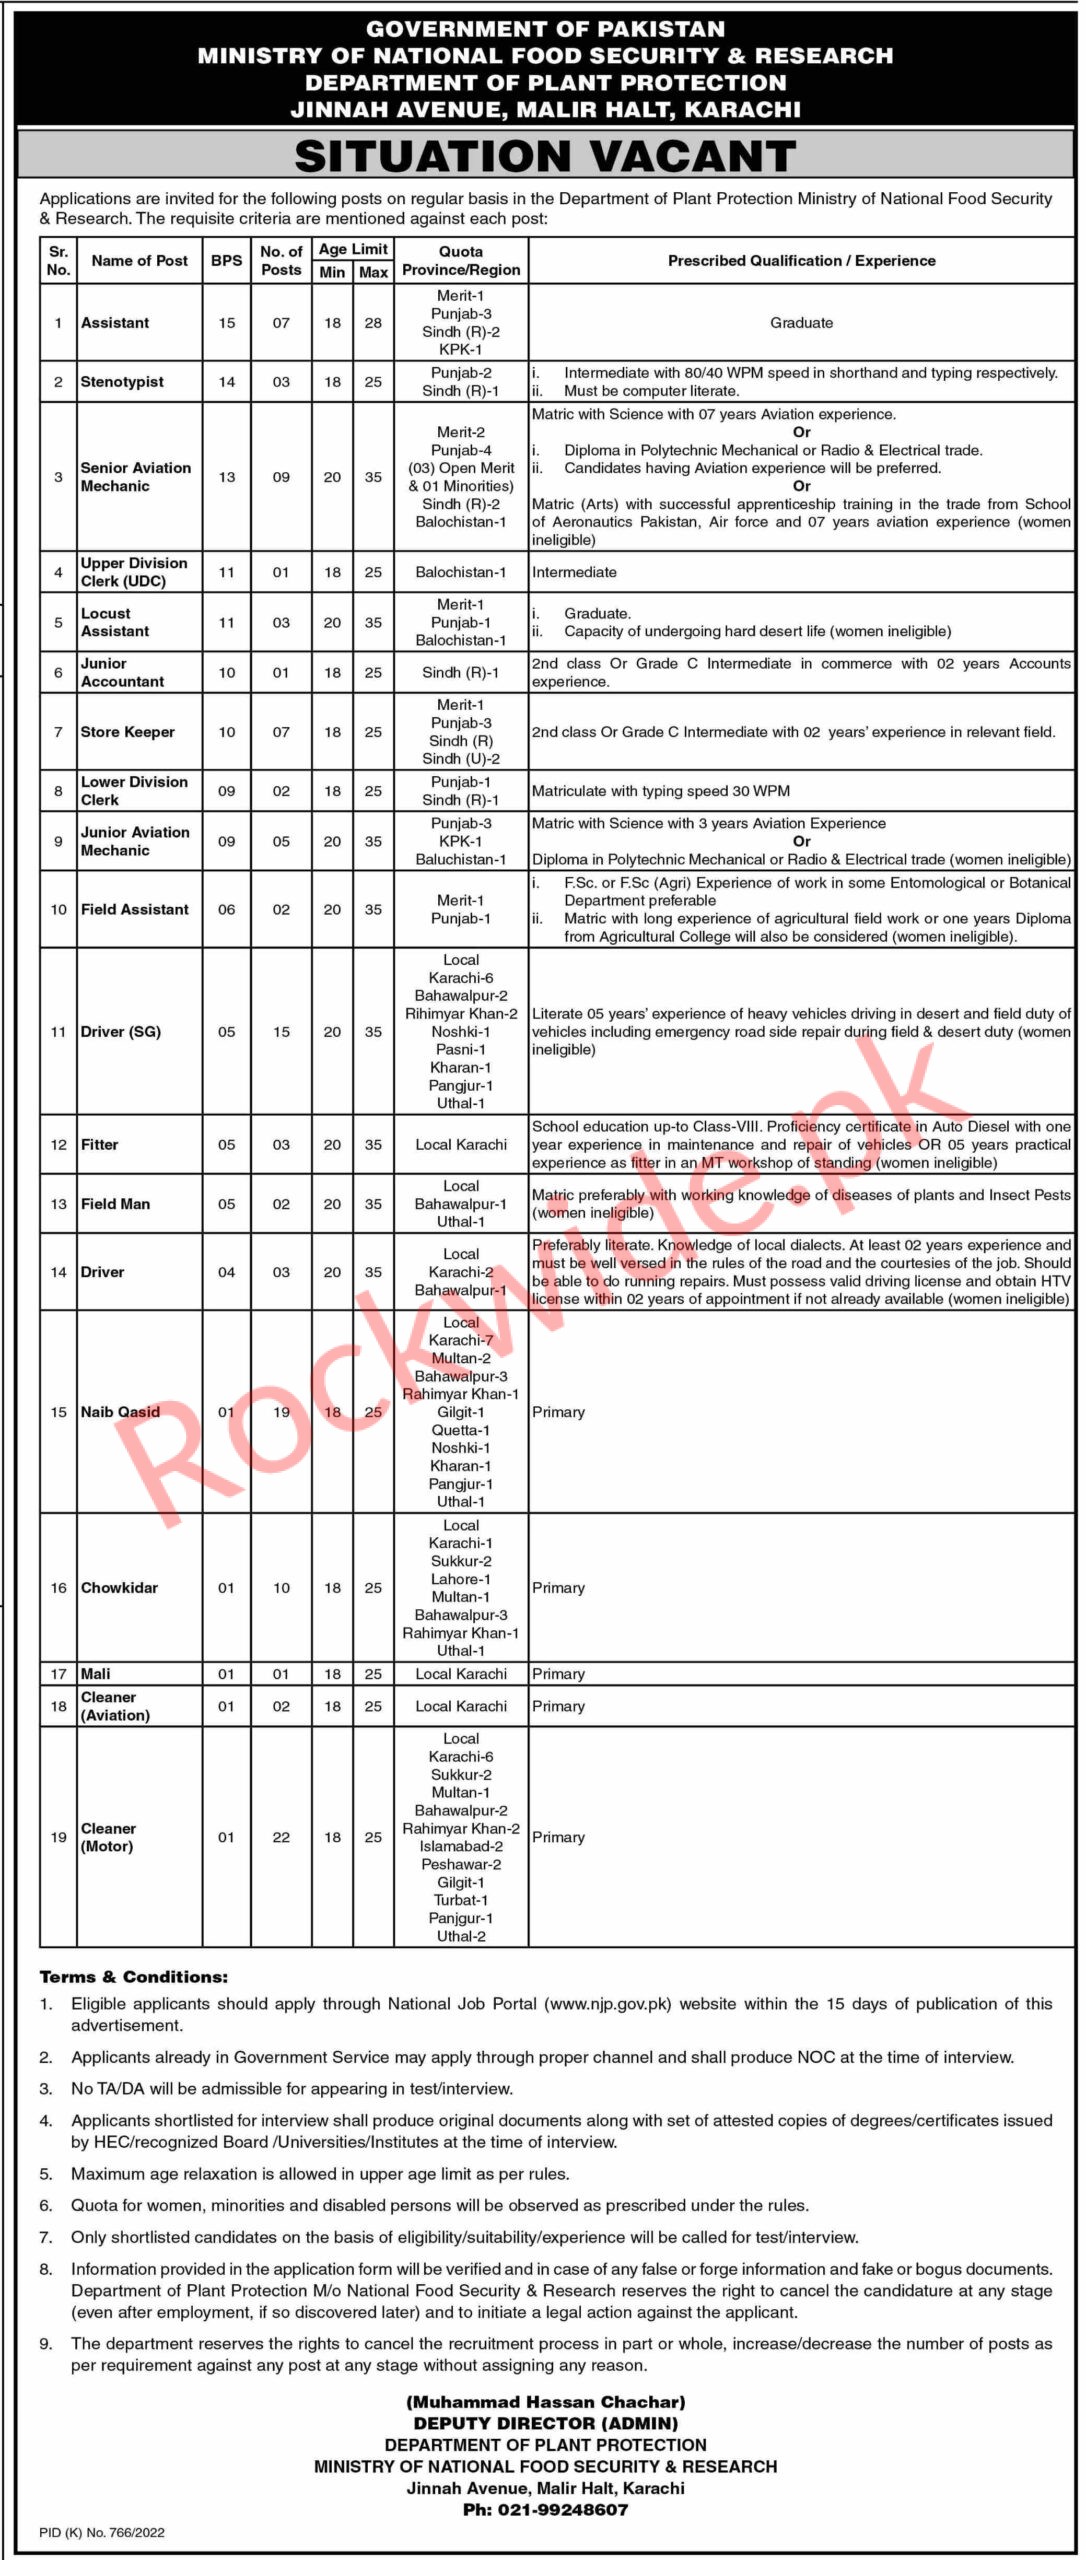 Ministry of National Food Security & Research jOBS